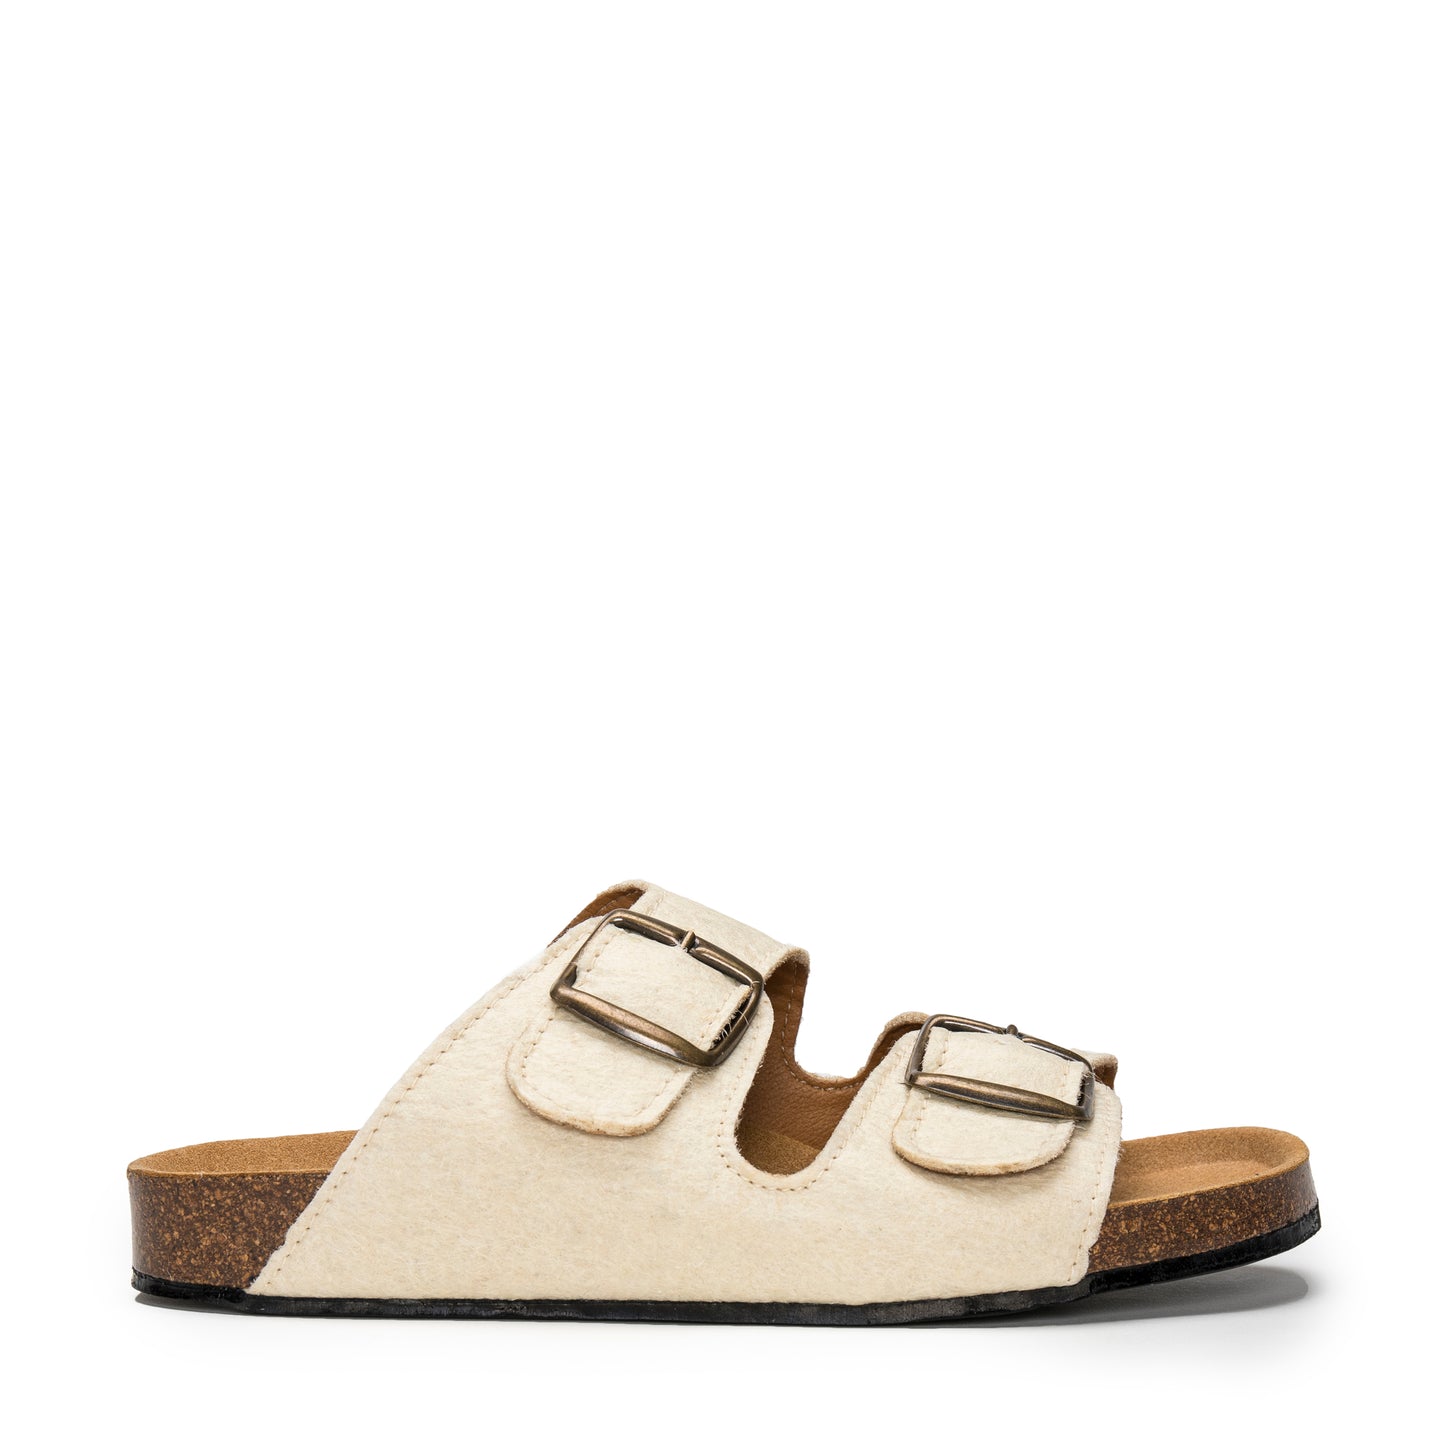 Darco - Sandal with straps